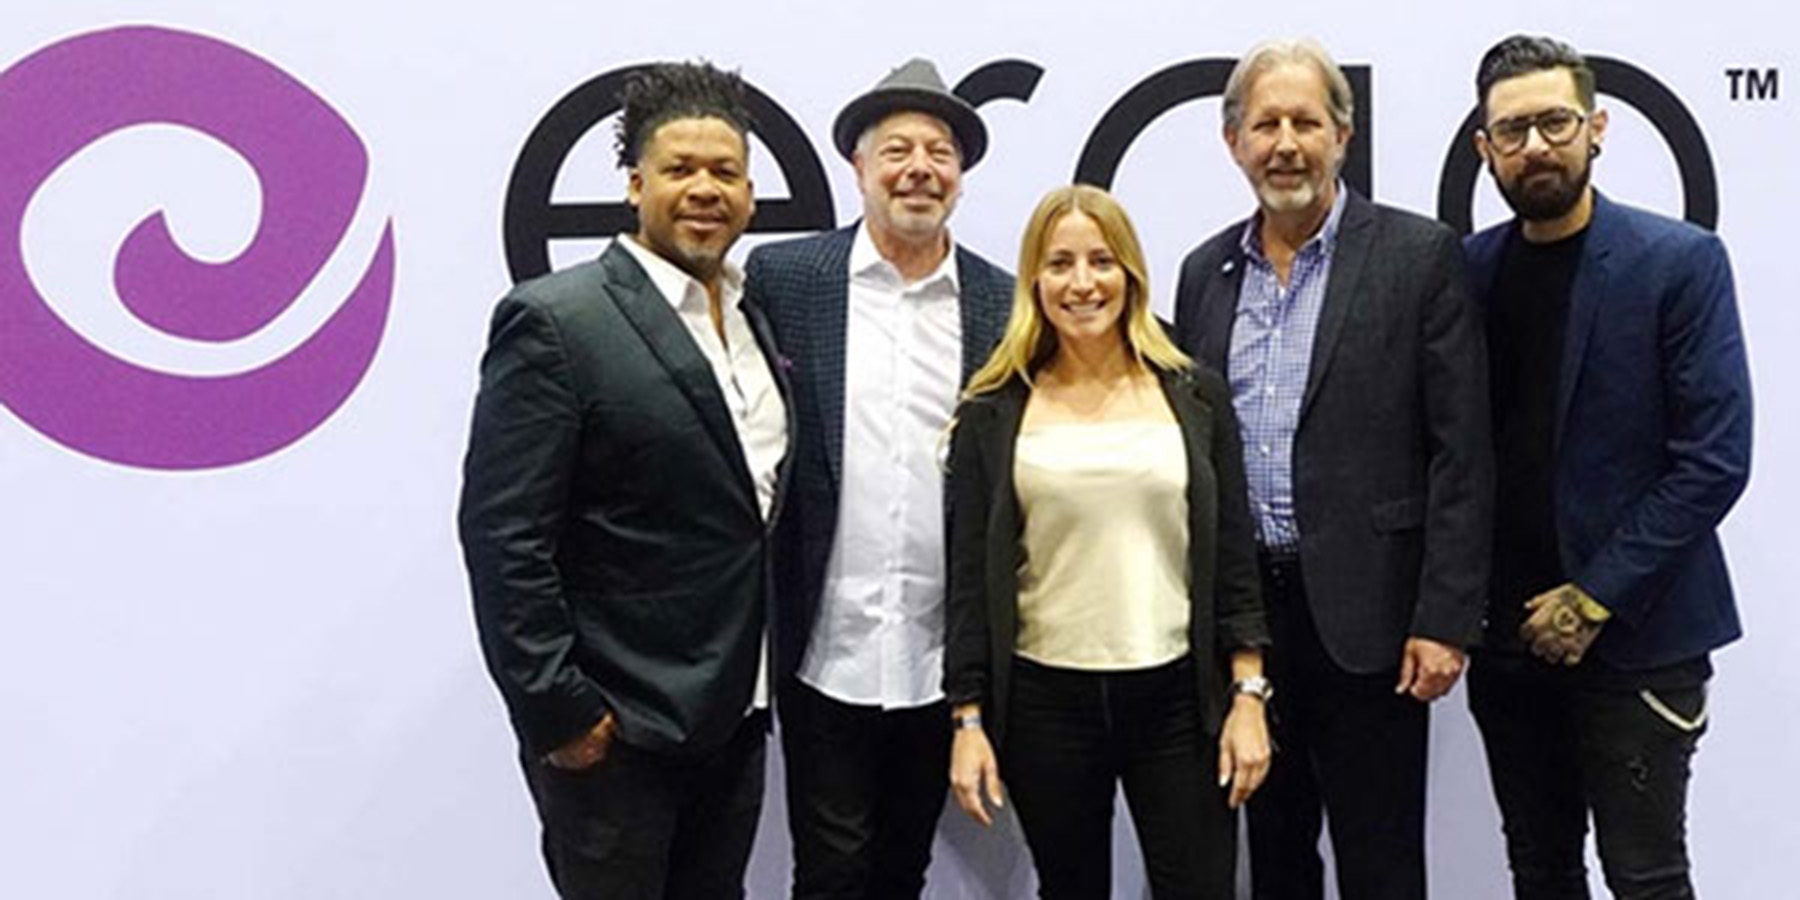 INDUSTRY NEWS! ERGO STYLING TOOLS ANNOUNCES NEW PARTNERSHIP WITH PIVOT POINT INTERNATIONAL